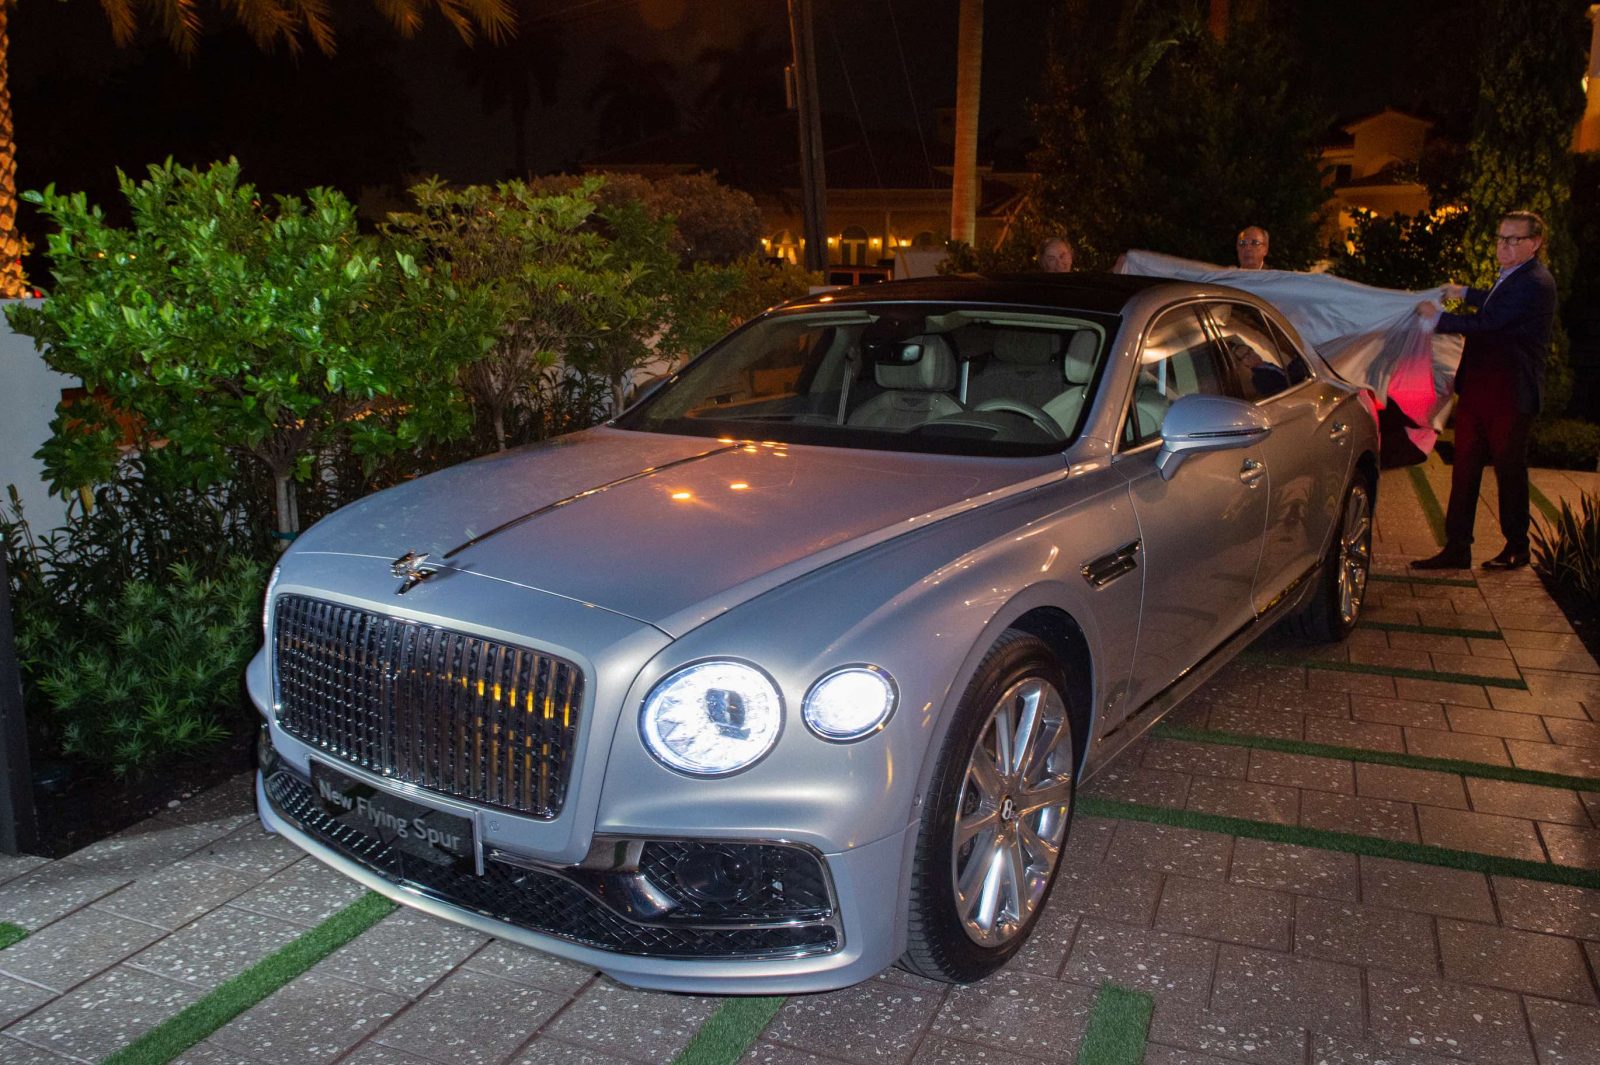 Holman Motorcars And Bentley Unveil “The Flying Spur” At Private Dinner With Haute Living